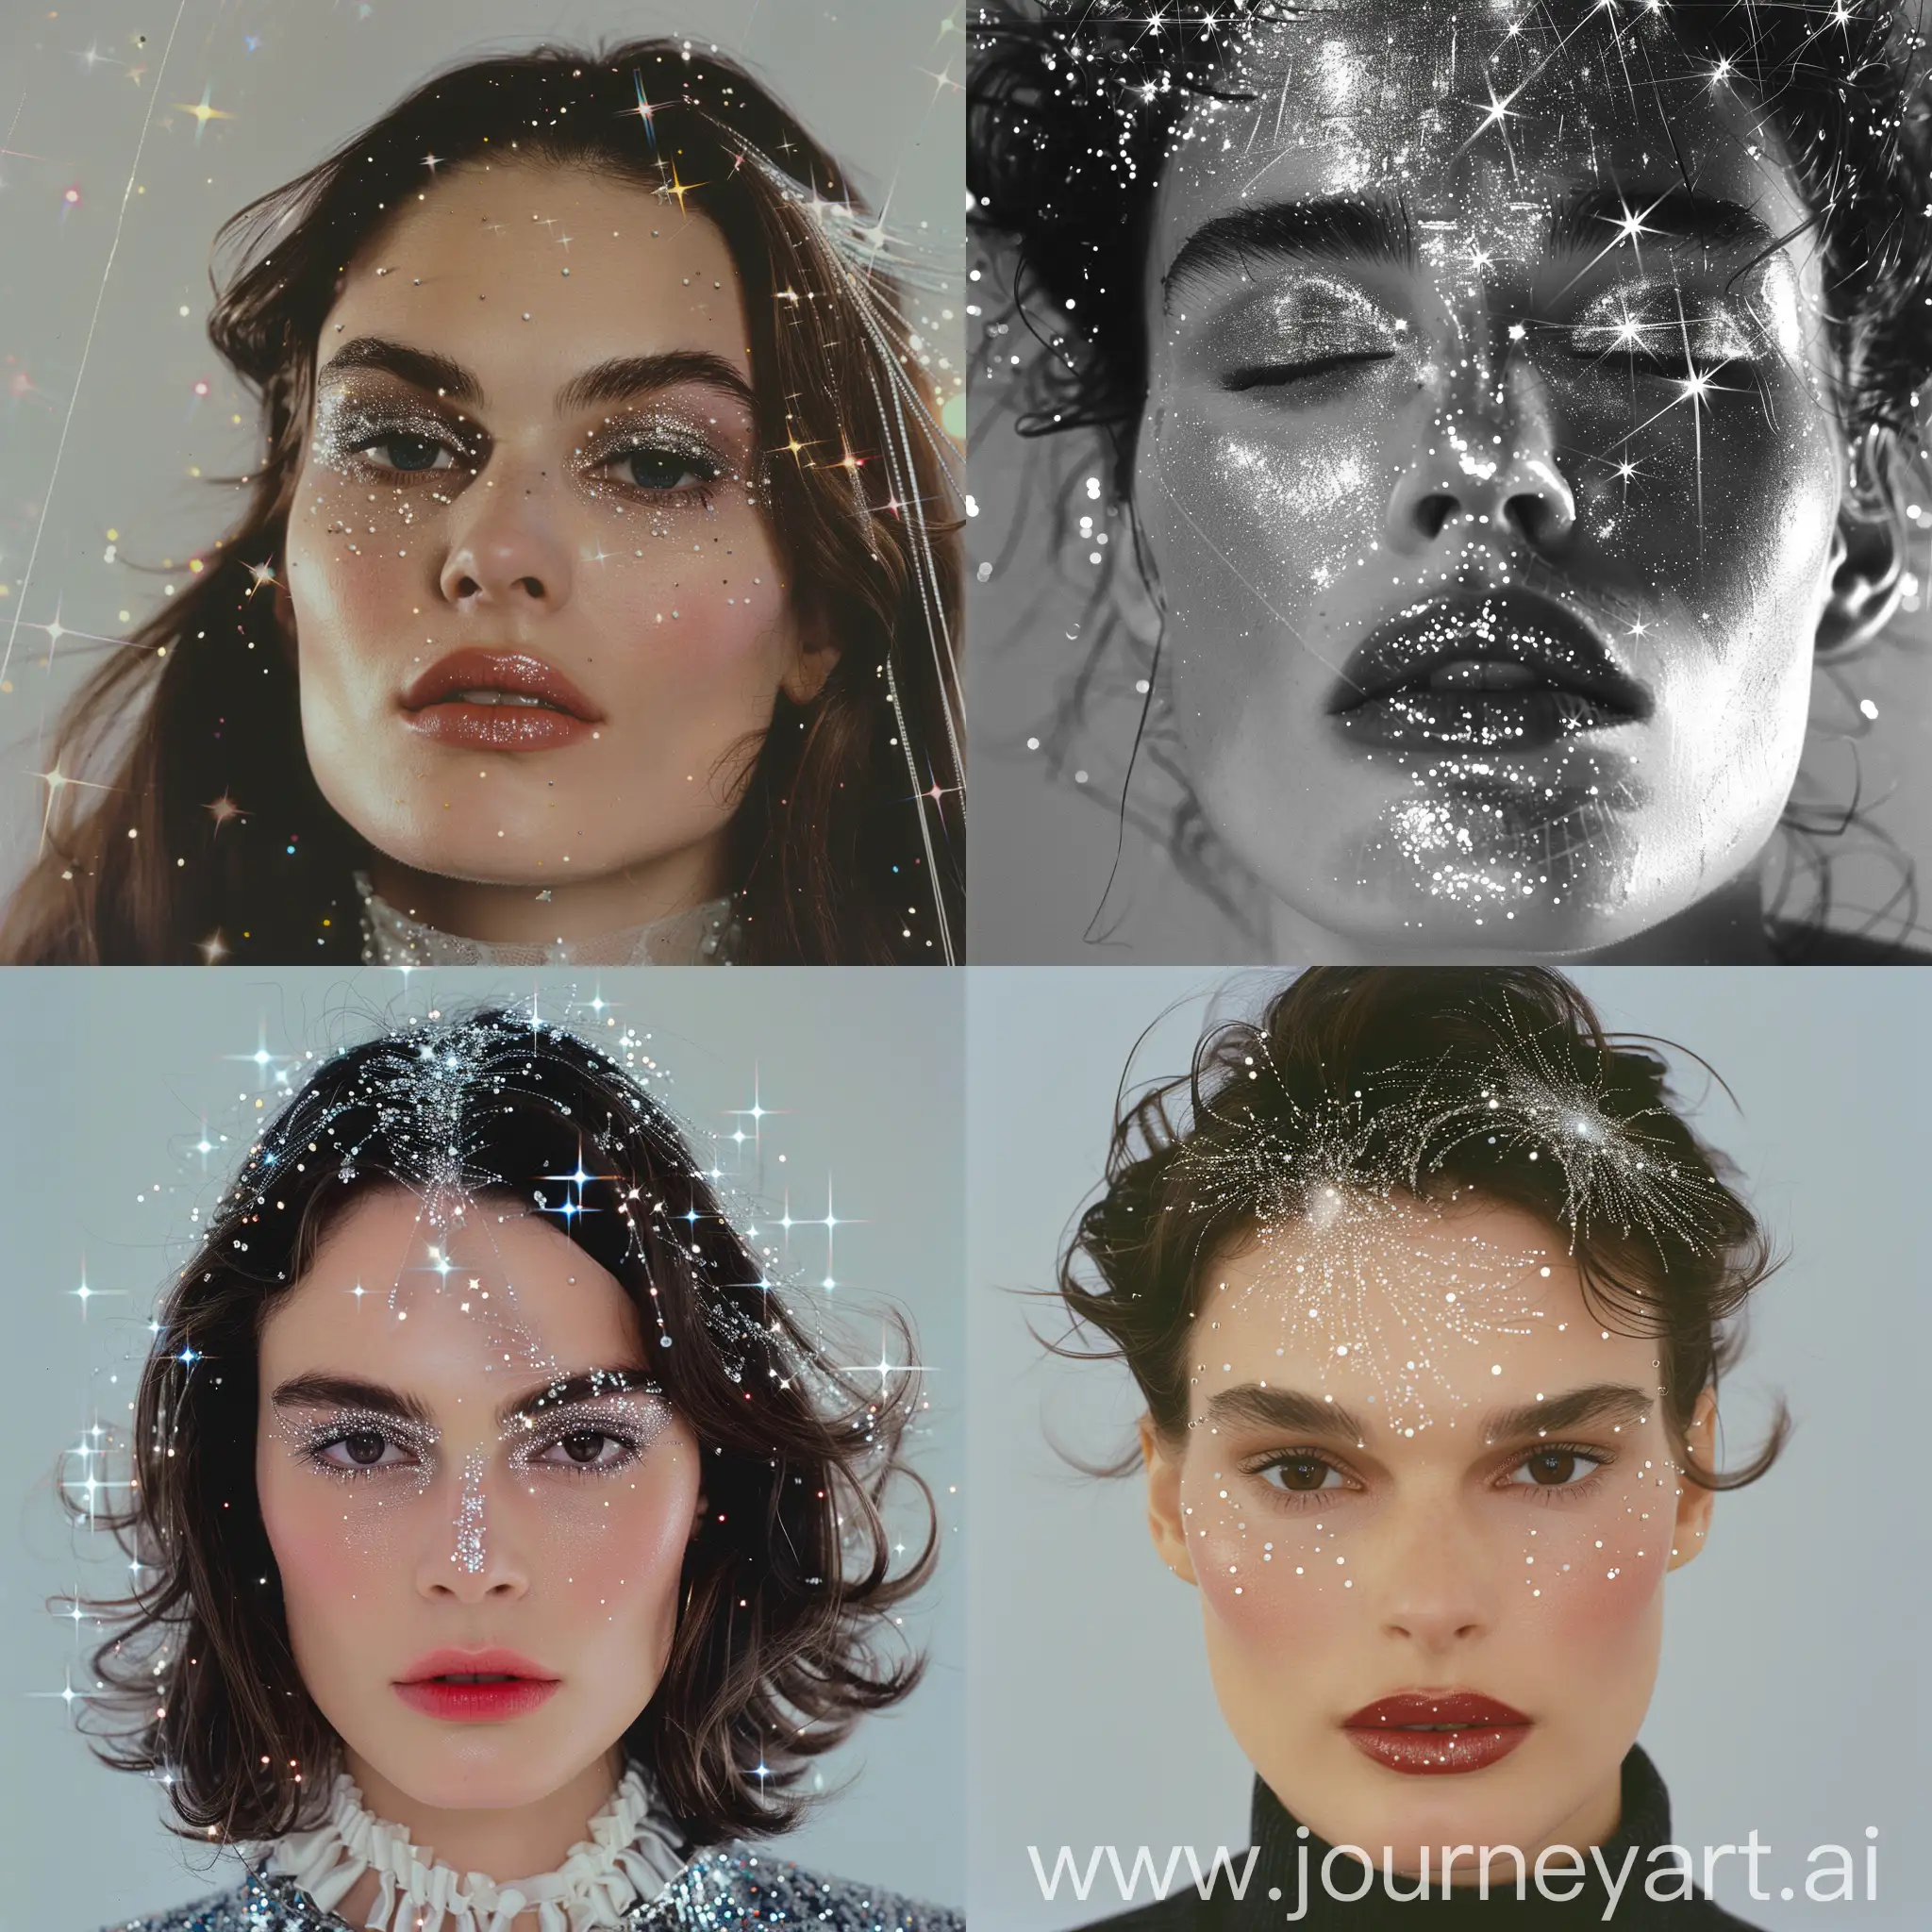 90s-Aesthetic-Portrait-Keira-Knightley-with-Stardust-Hair-and-Plump-Lips